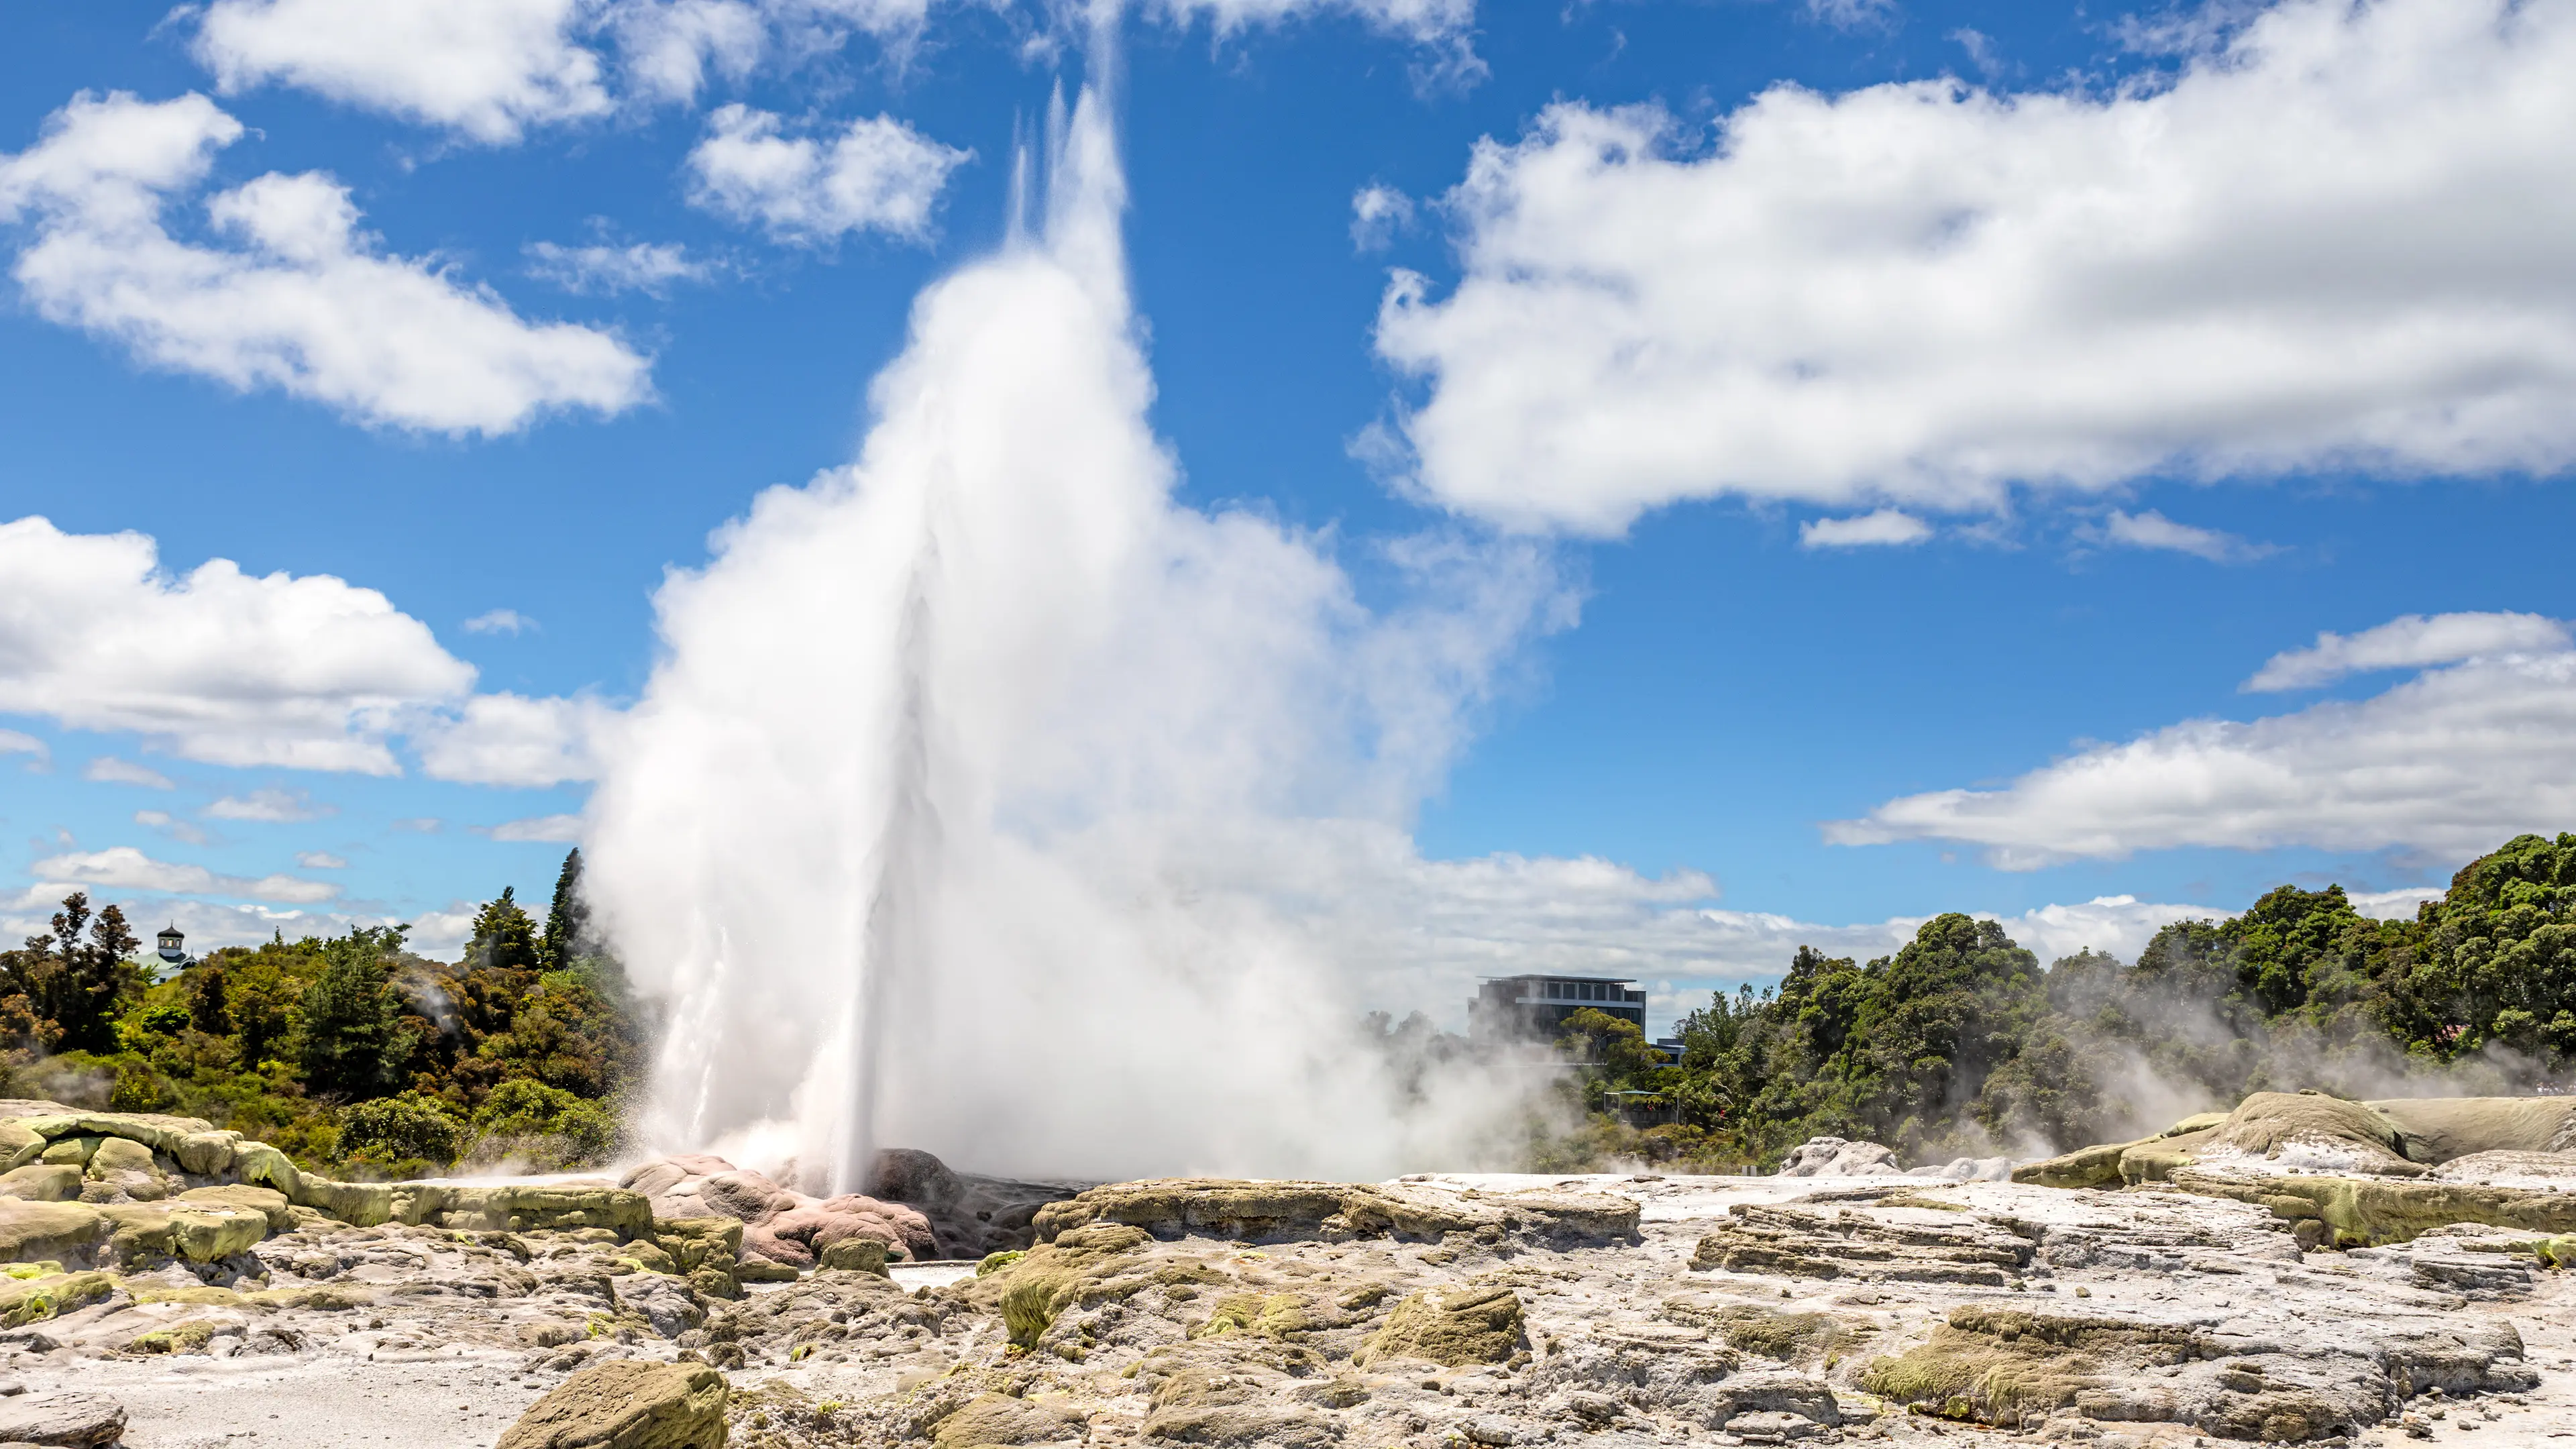 3-Day Rustic Rotorua Itinerary for Couples: Adventure & Relaxation